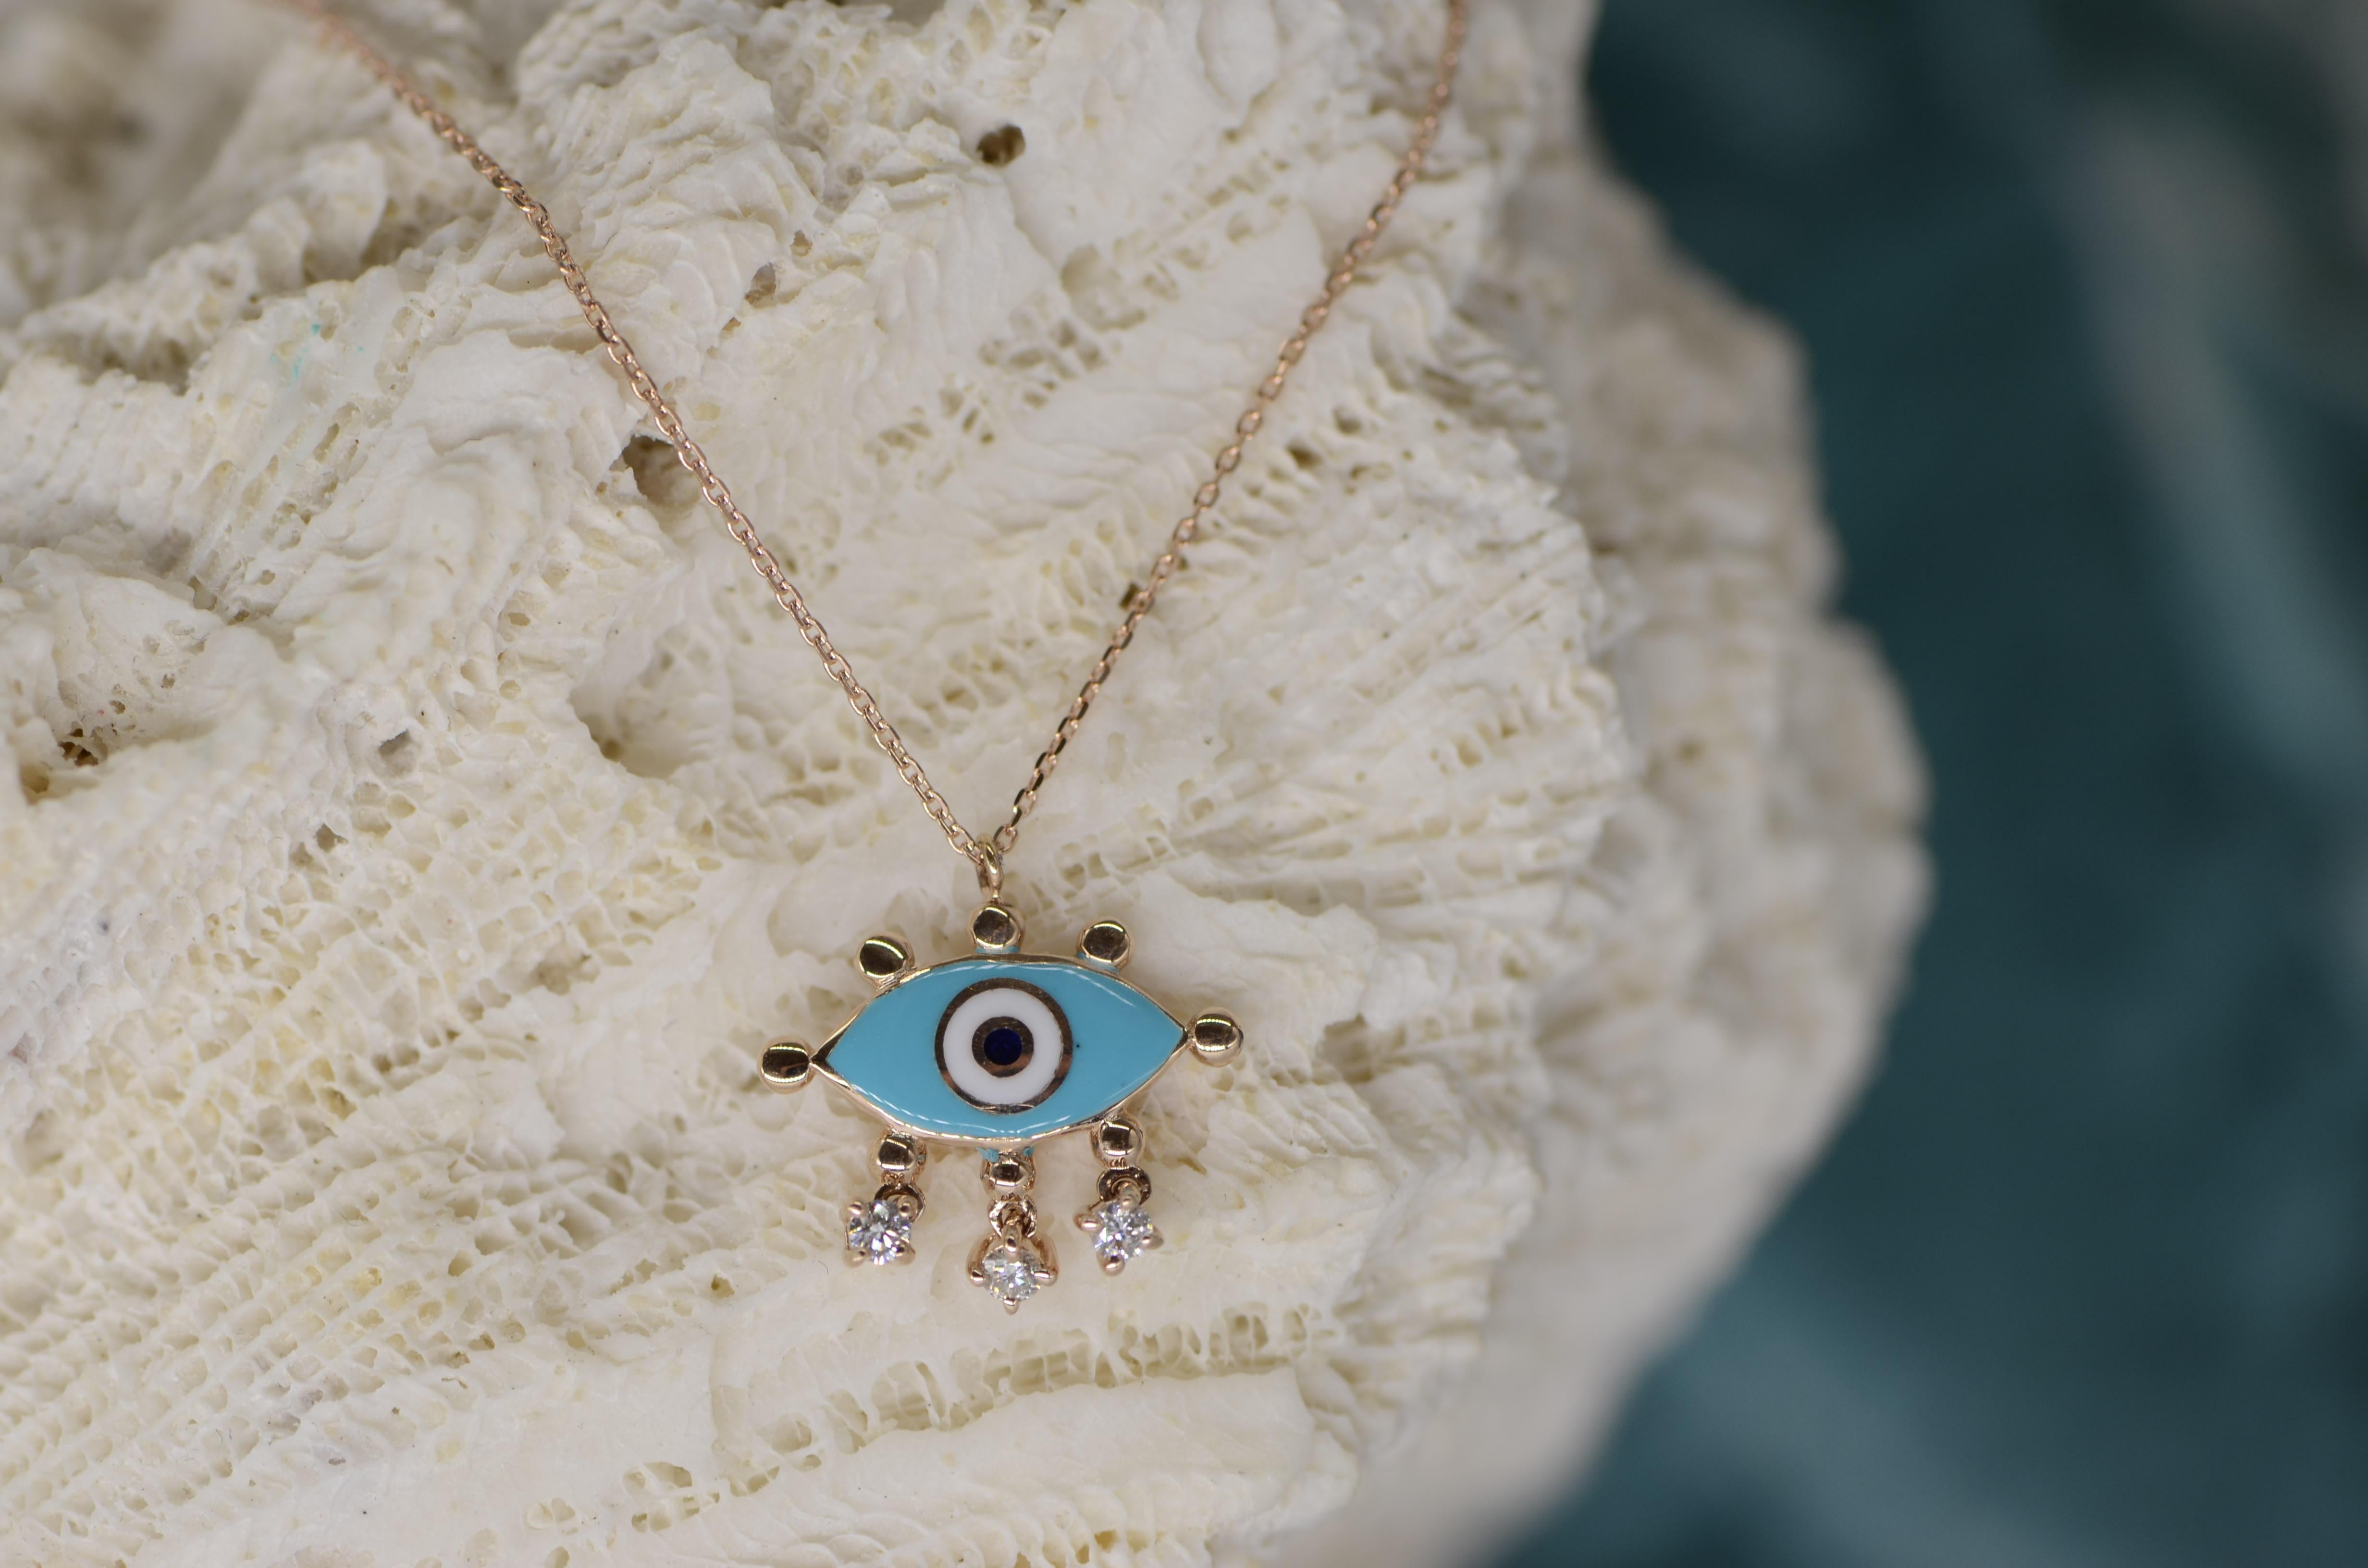 Turquoise evil eye necklace in 14k rose gold with diamond by Selda Jewellery

Additional Information:-
Collection: Art Of Giving Collection
14k Rose gold
0.08ct White diamond
Pendant height 1.5 cm
Chain length 42cm